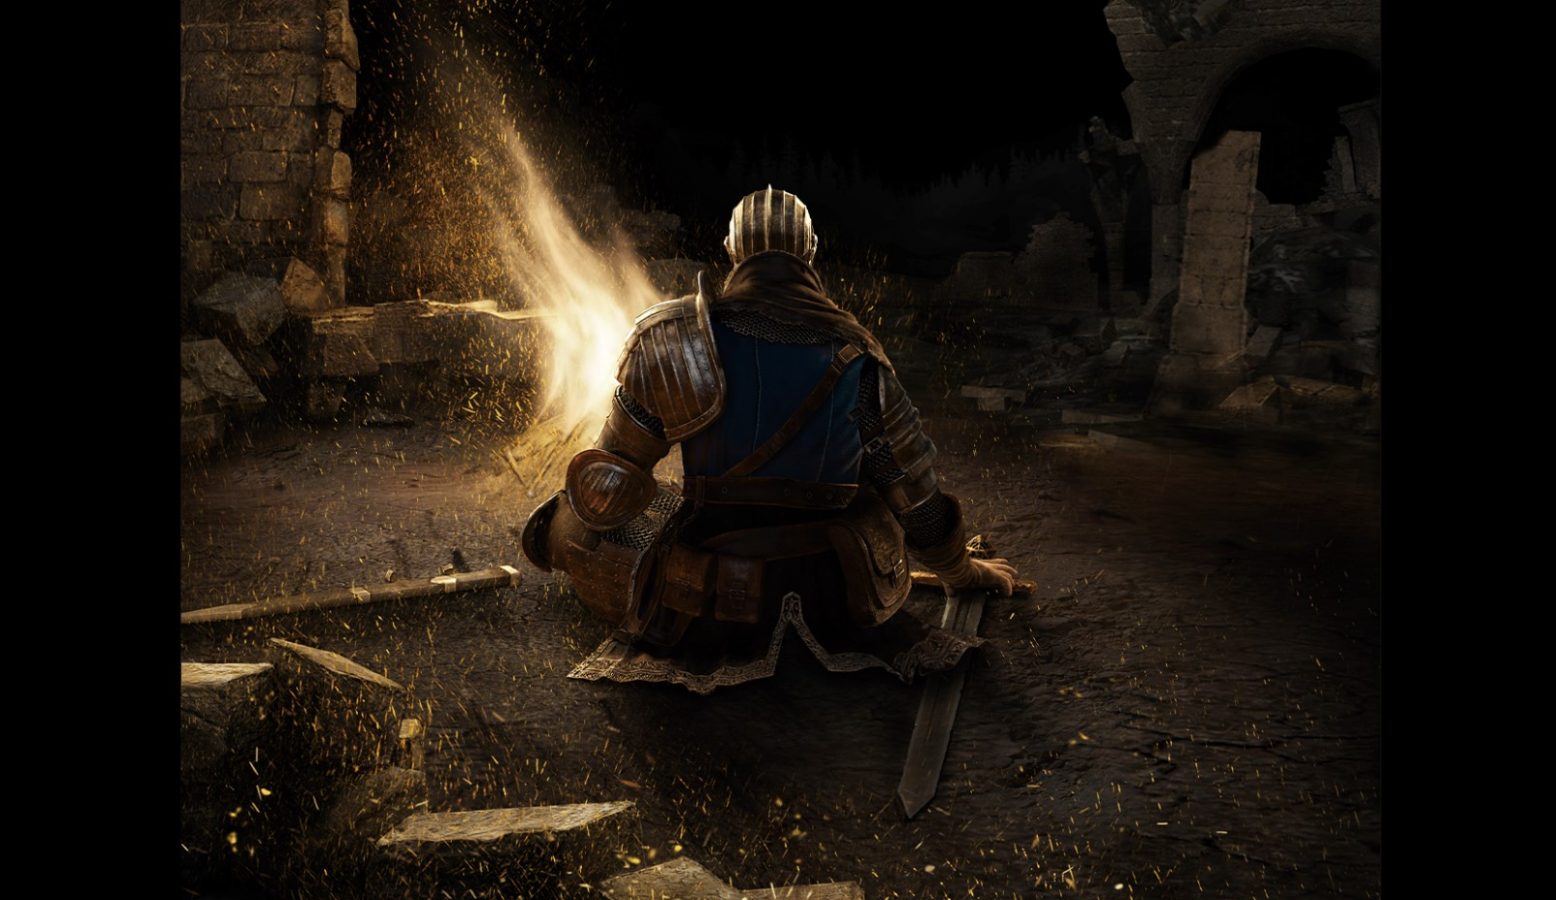 First look at the highly anticipated upcoming Dark Souls RPG